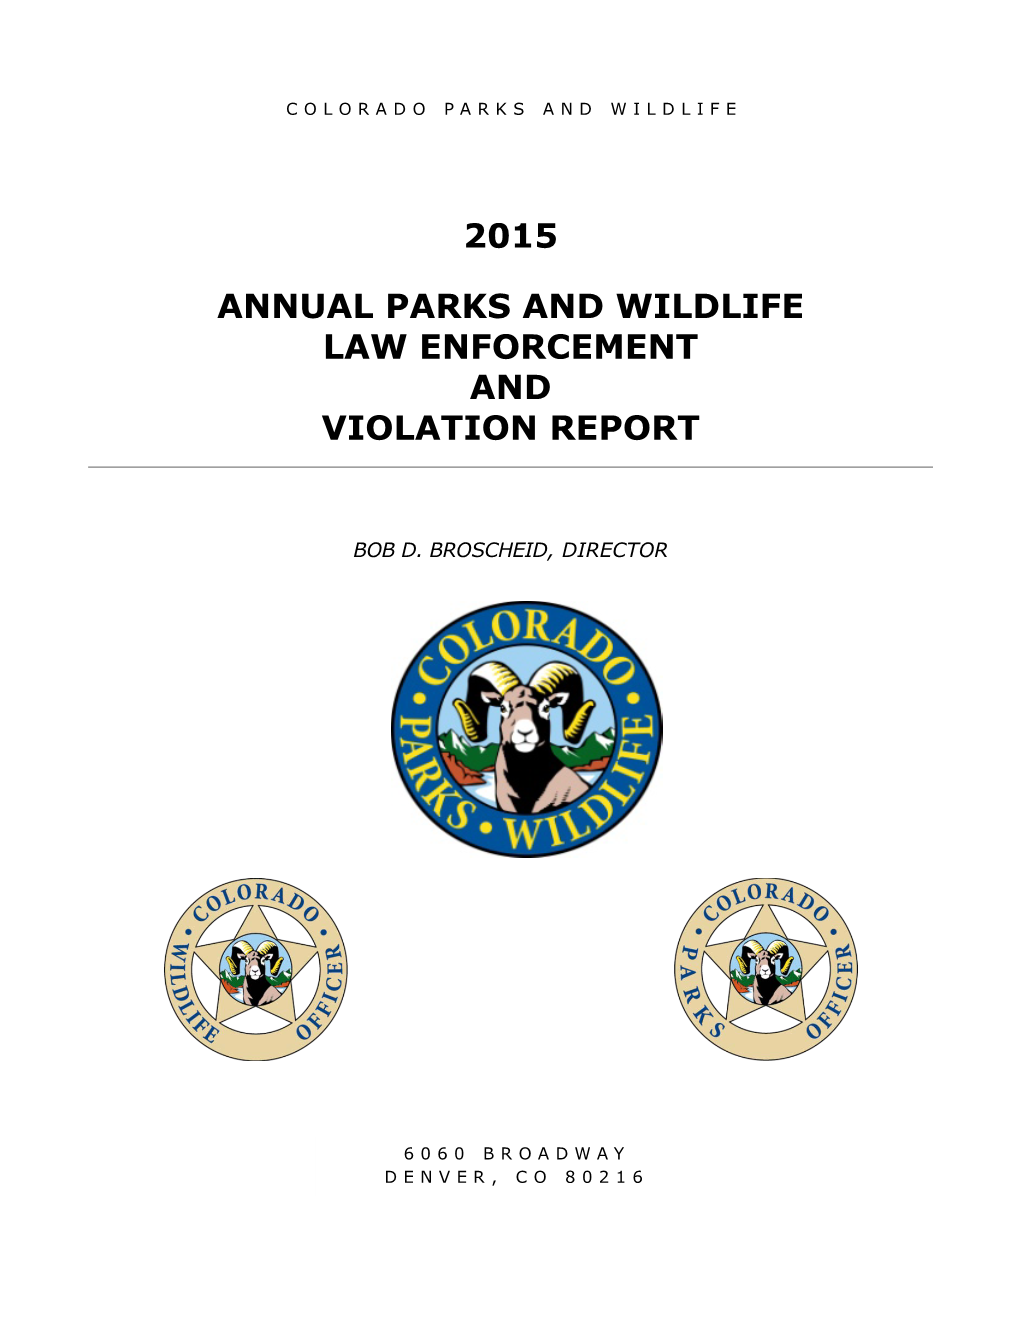 2015 Annual Law Enforcement and Violations Report